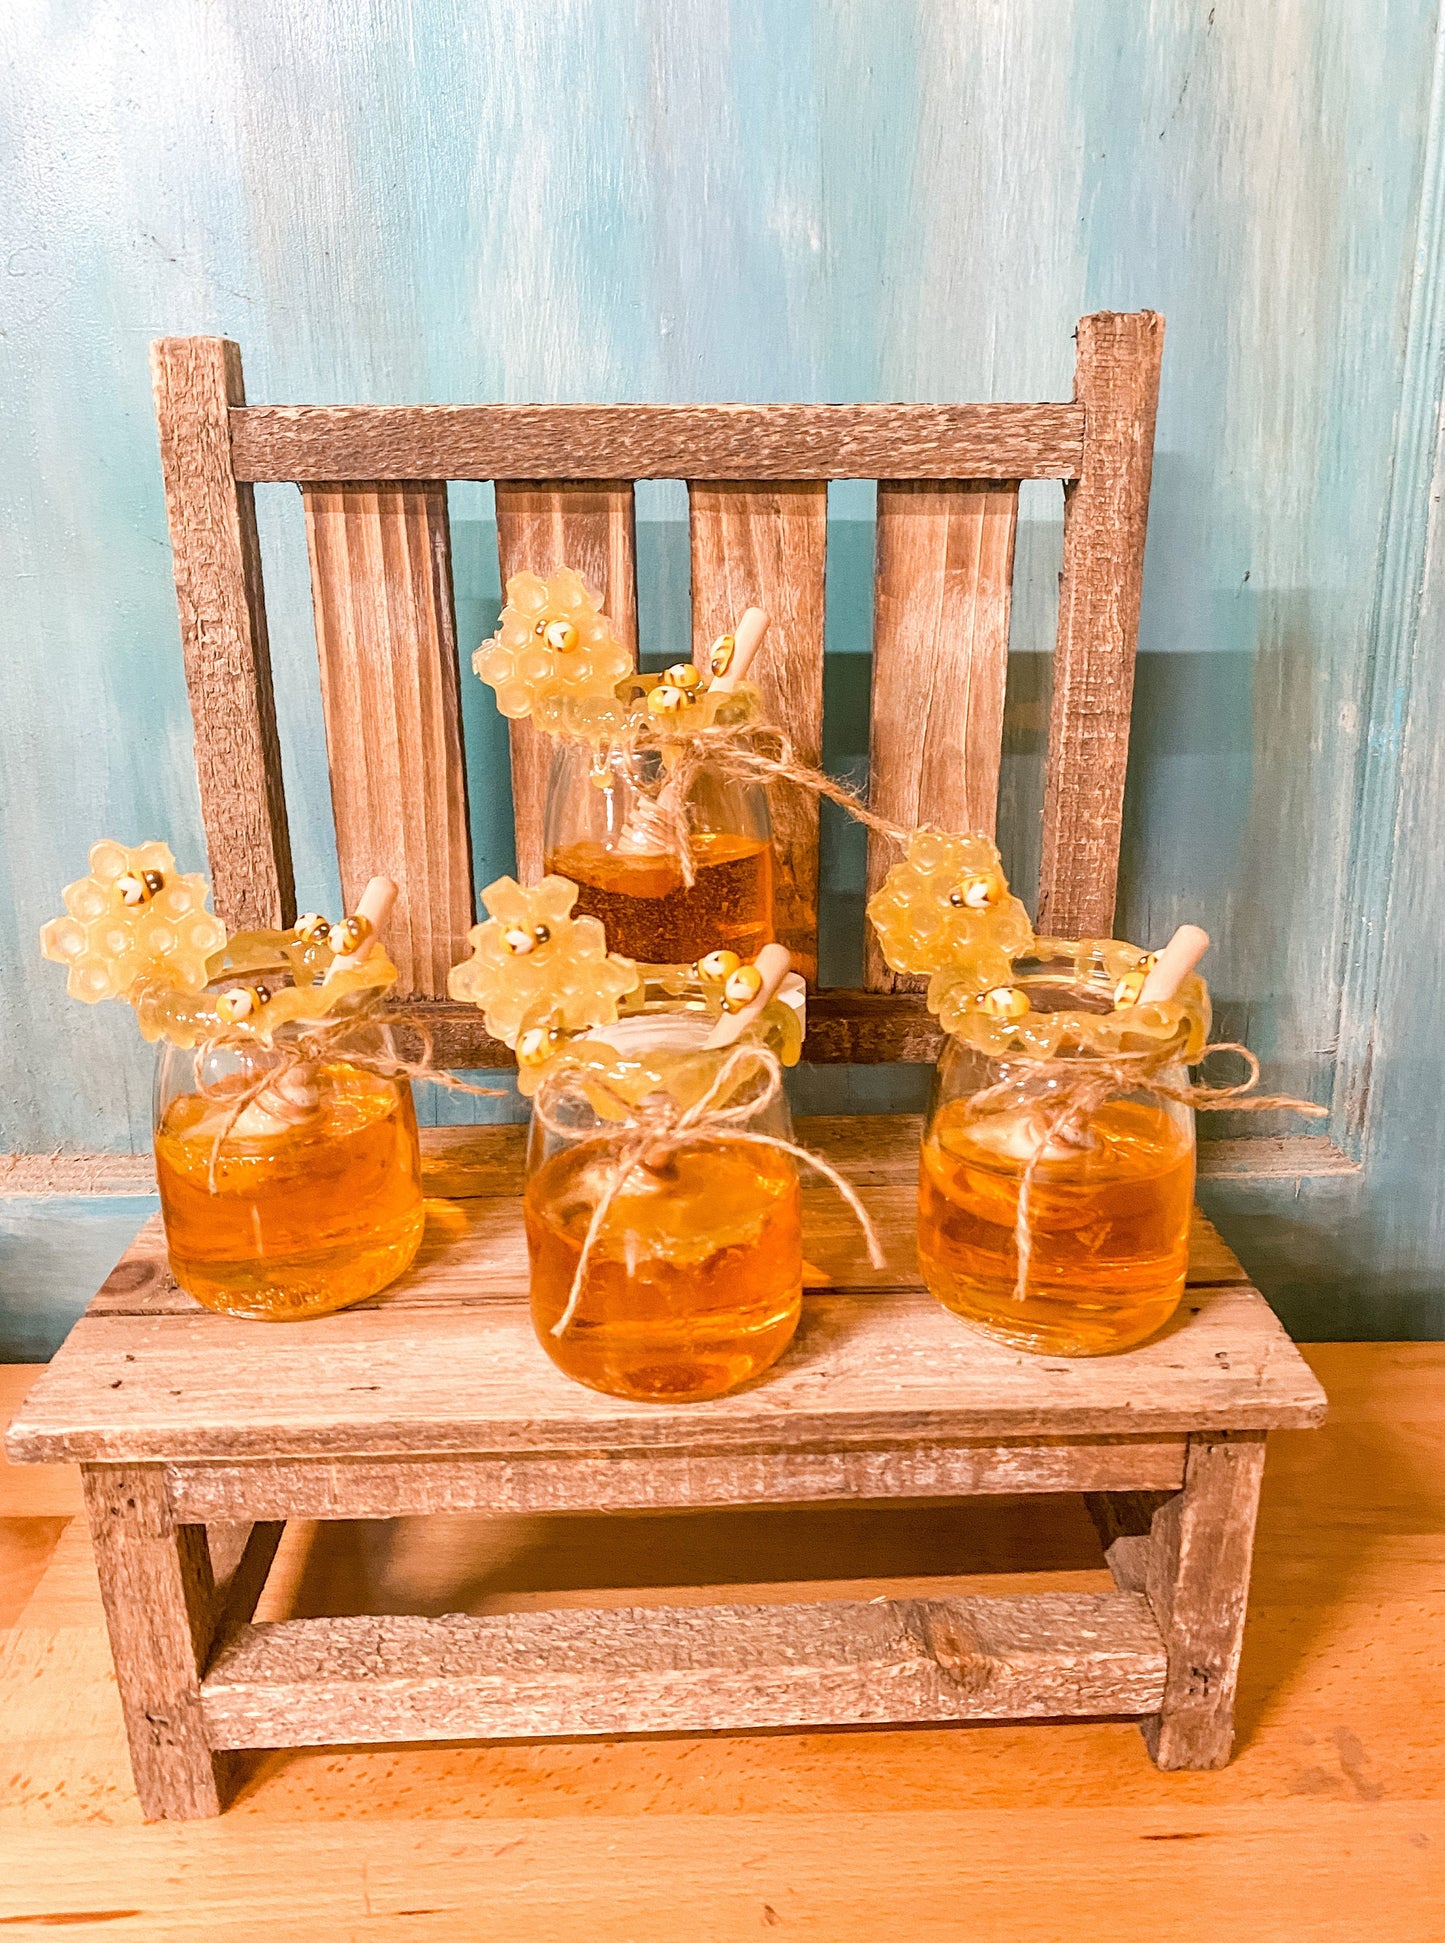 Faux/ Fake Honey Pot withs Bees and Dipper, Tiered Tray Decor, Summer Decor, Bee Decor, Farmhouse Decor